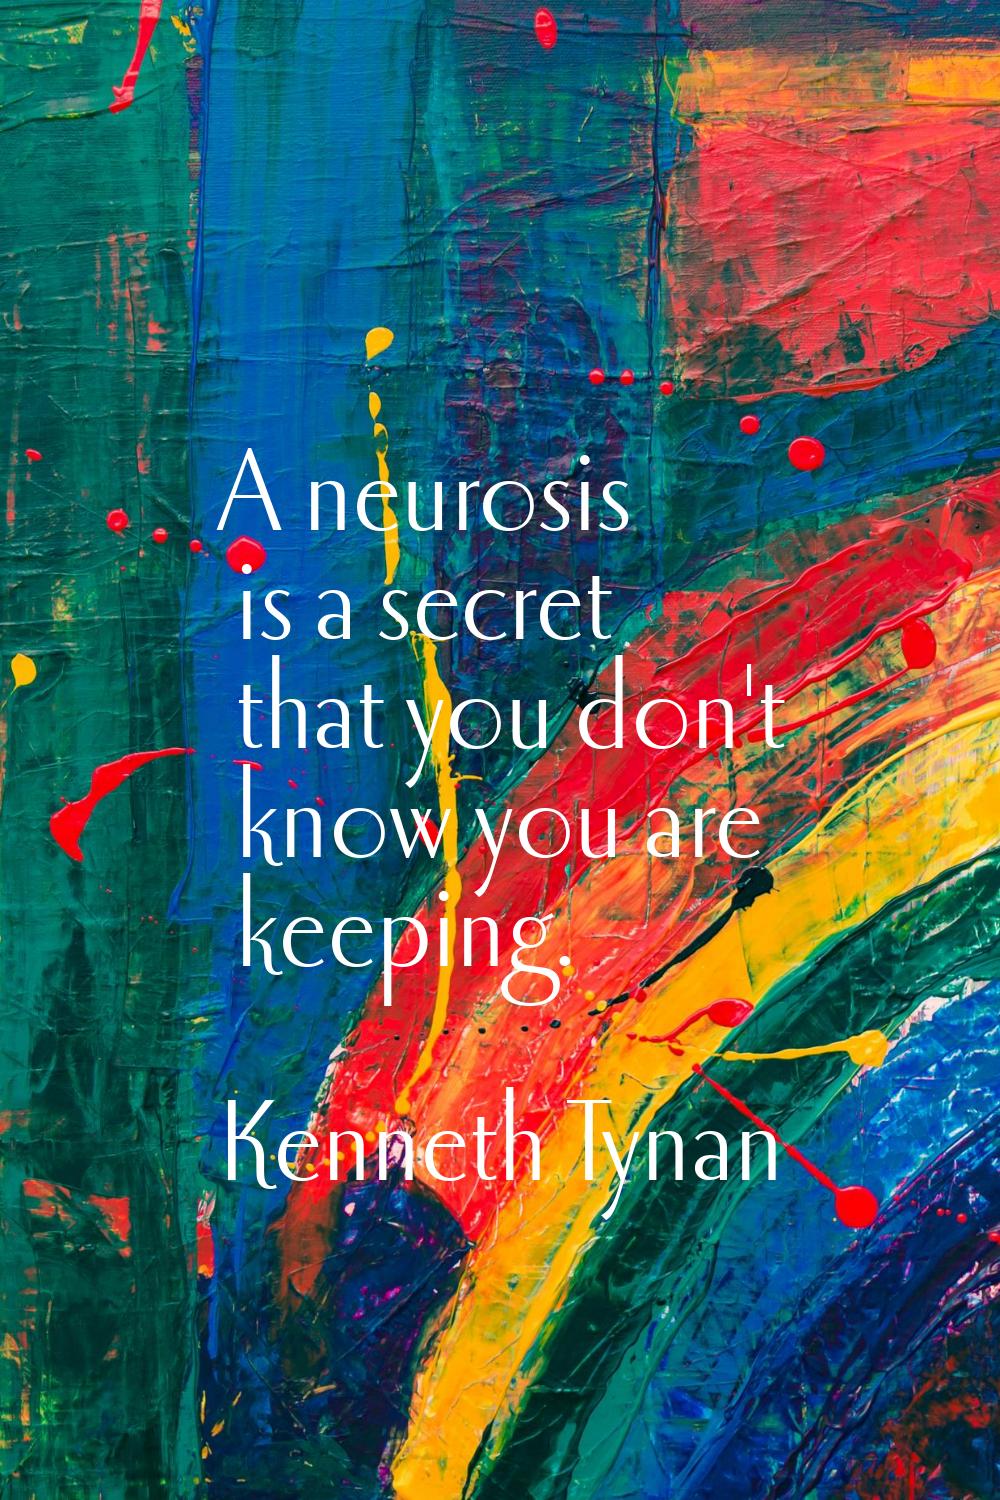 A neurosis is a secret that you don't know you are keeping.